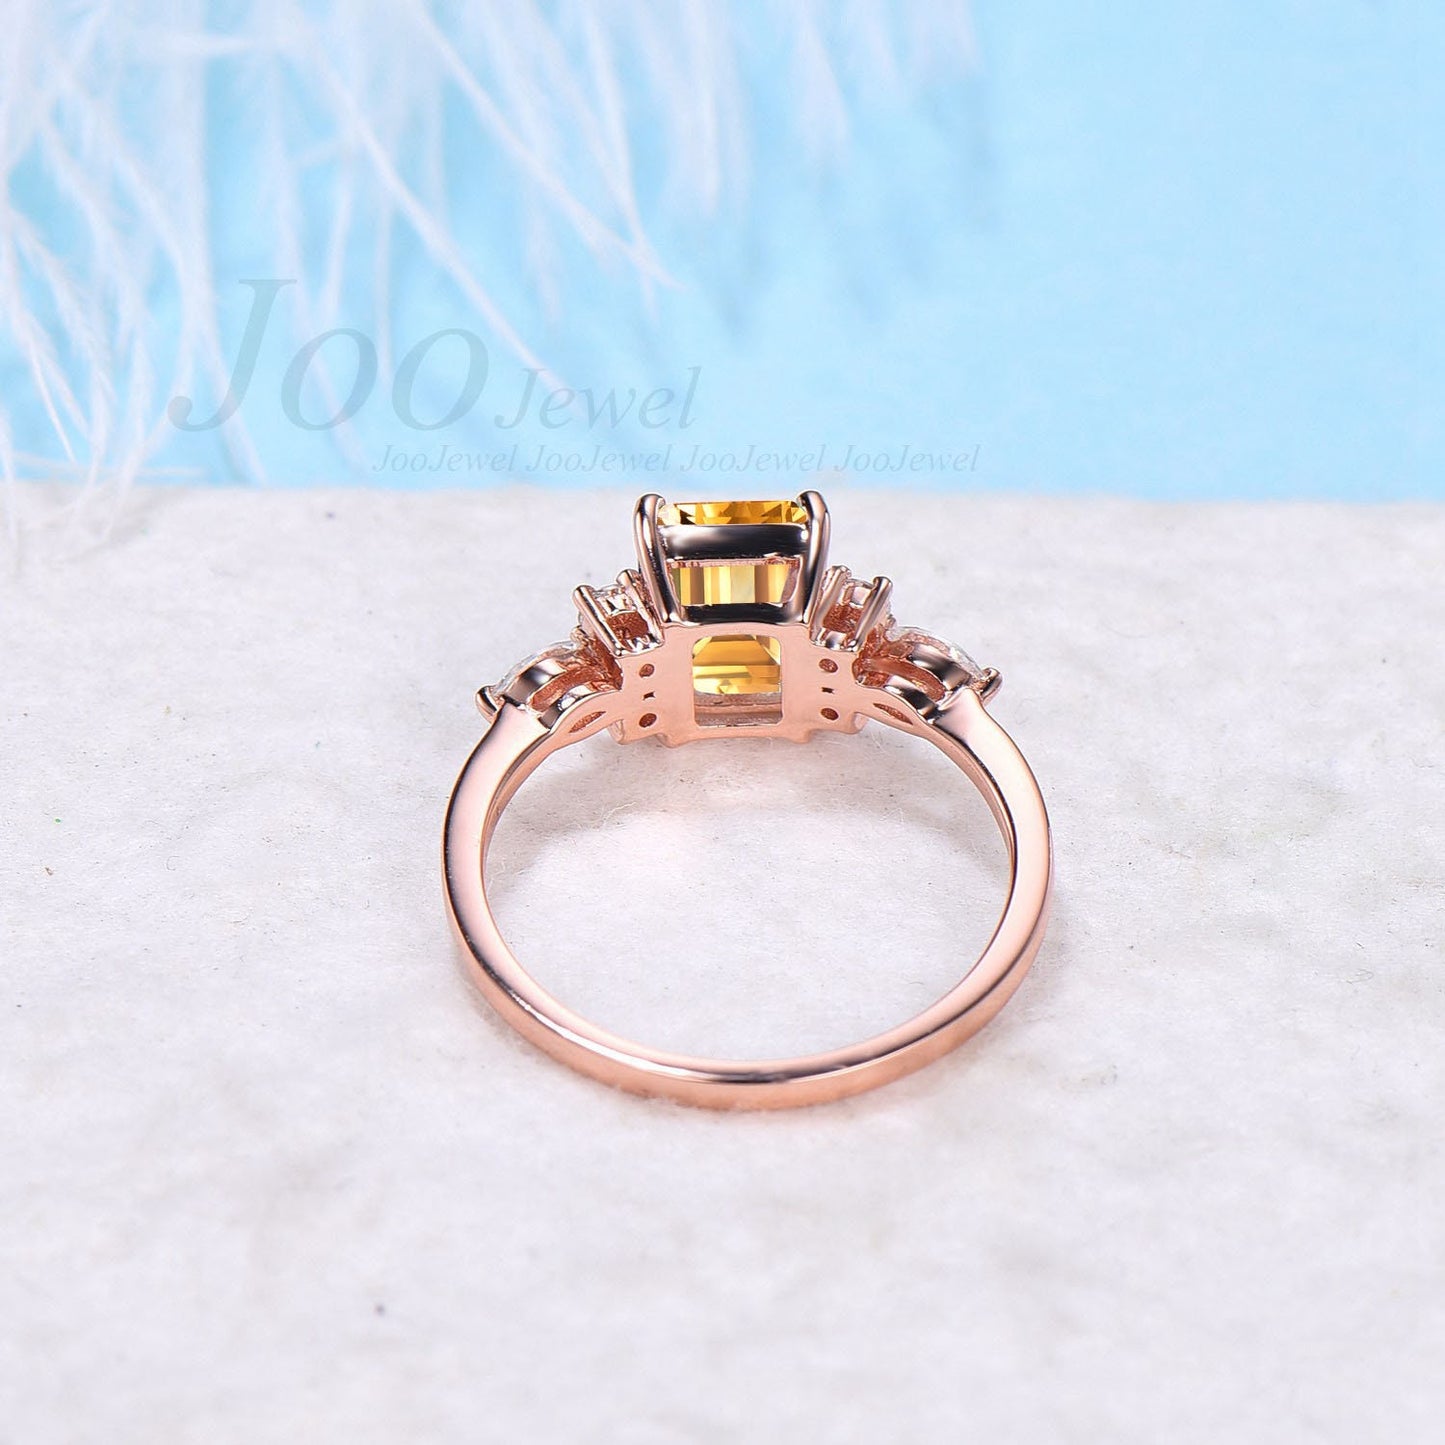 Emerald Cut Natural Citrine Ring Vintage 2ct Citrine Wedding Ring Sterling Silver Gold Citrine Engagement Ring November Birthstone Jewelry